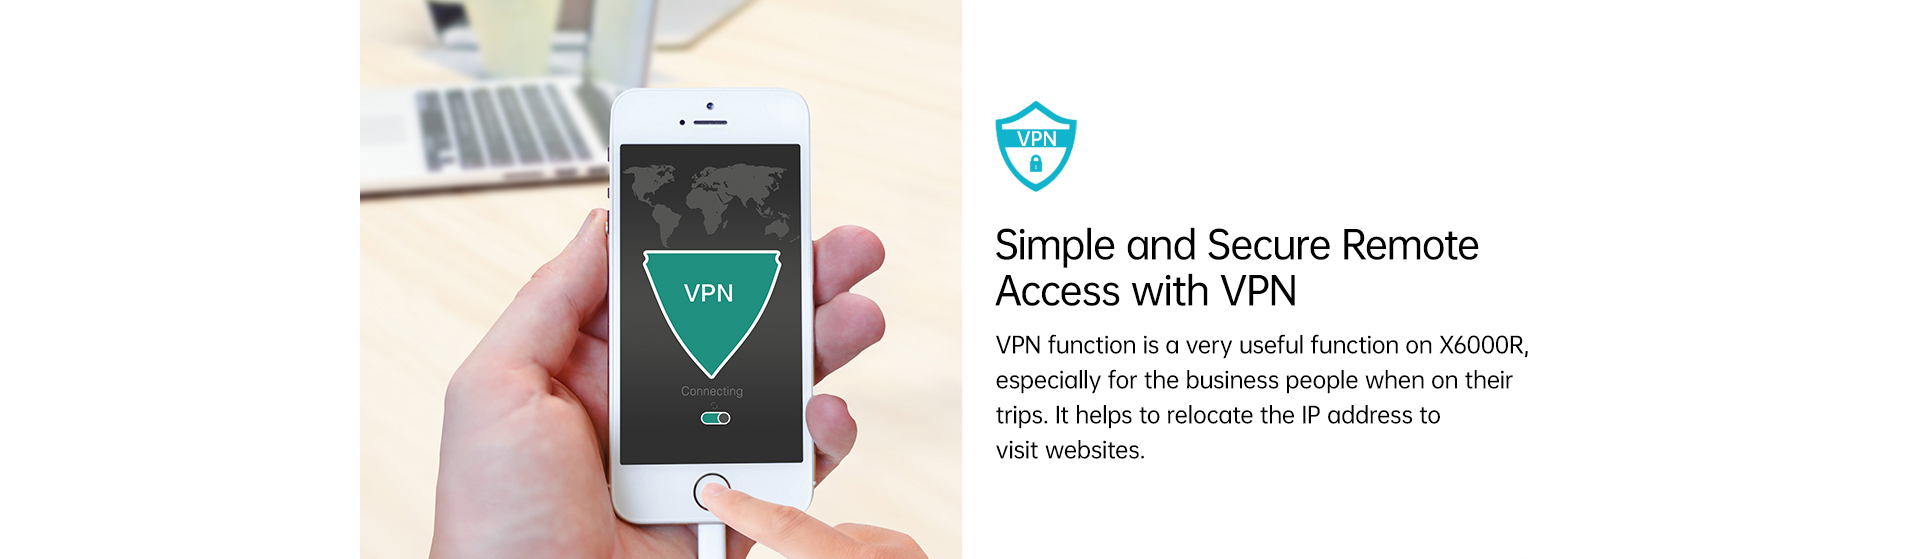 secure remote accessing with VPN